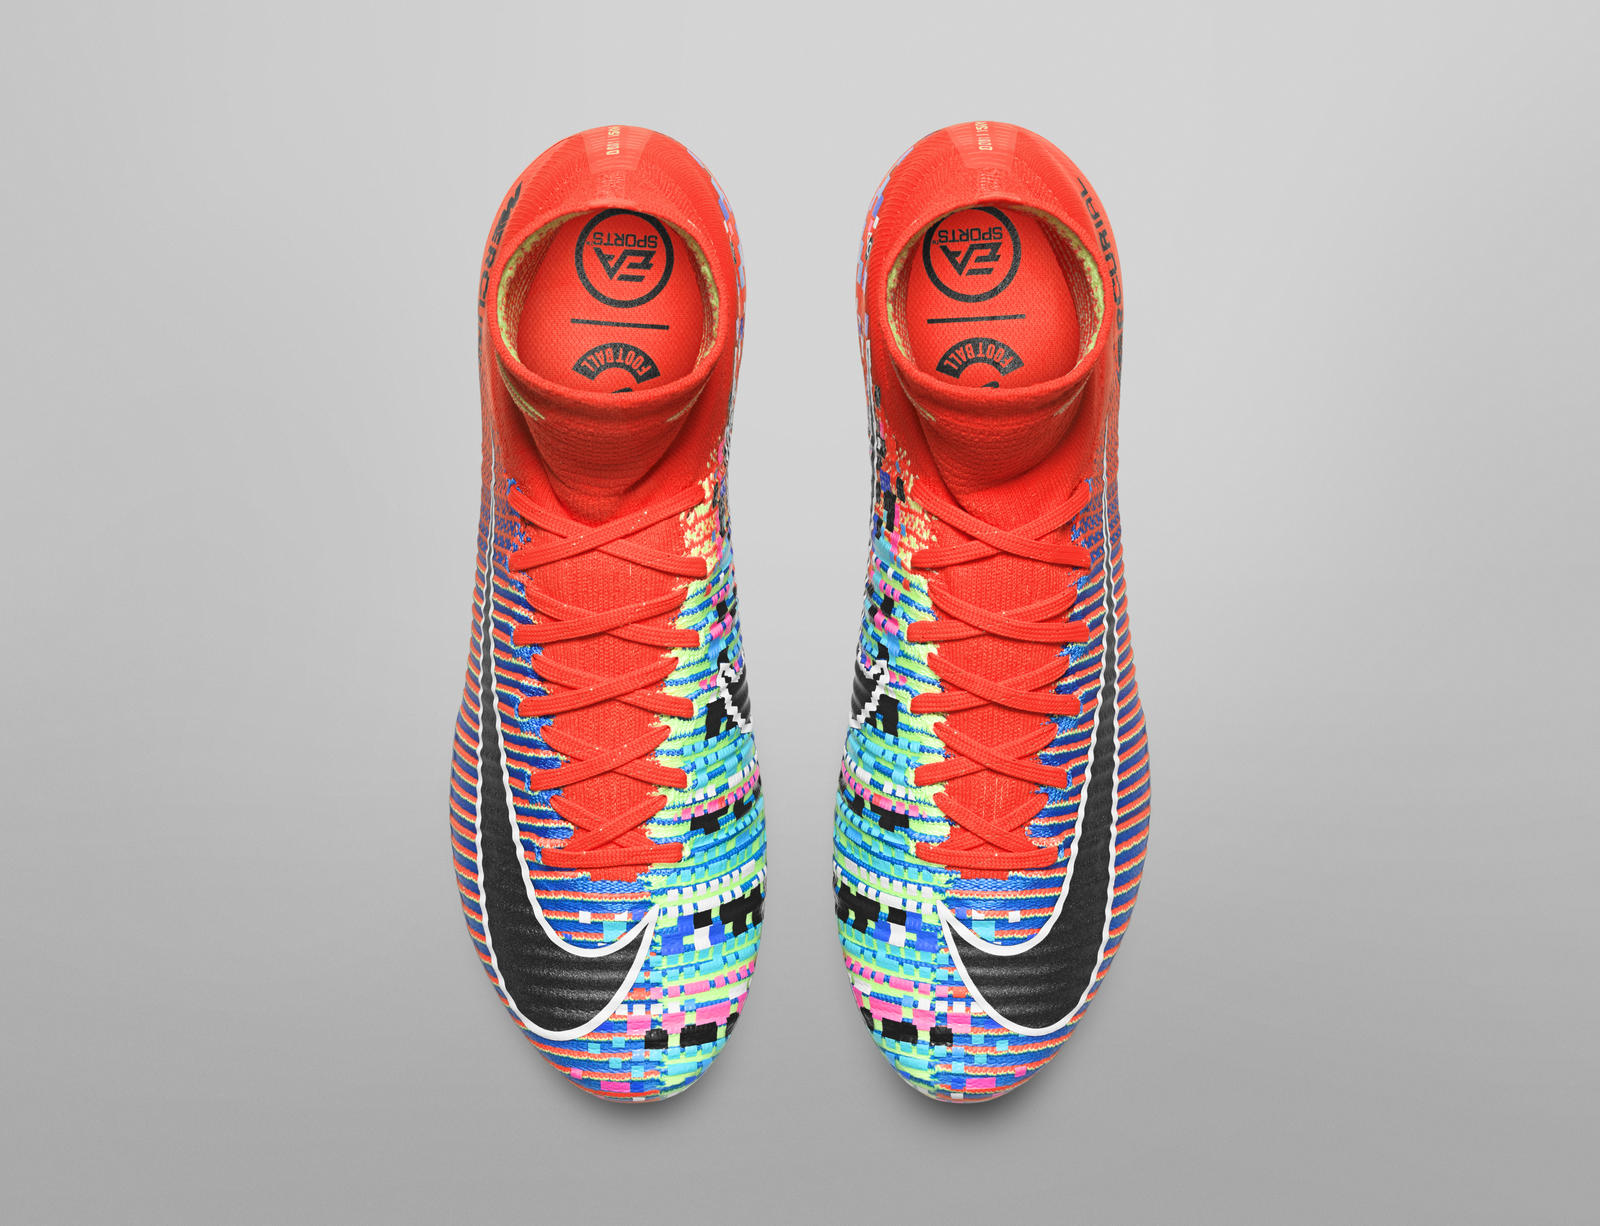 nike-mercurial-ea-sports-football-shoes-2016-limited-edition